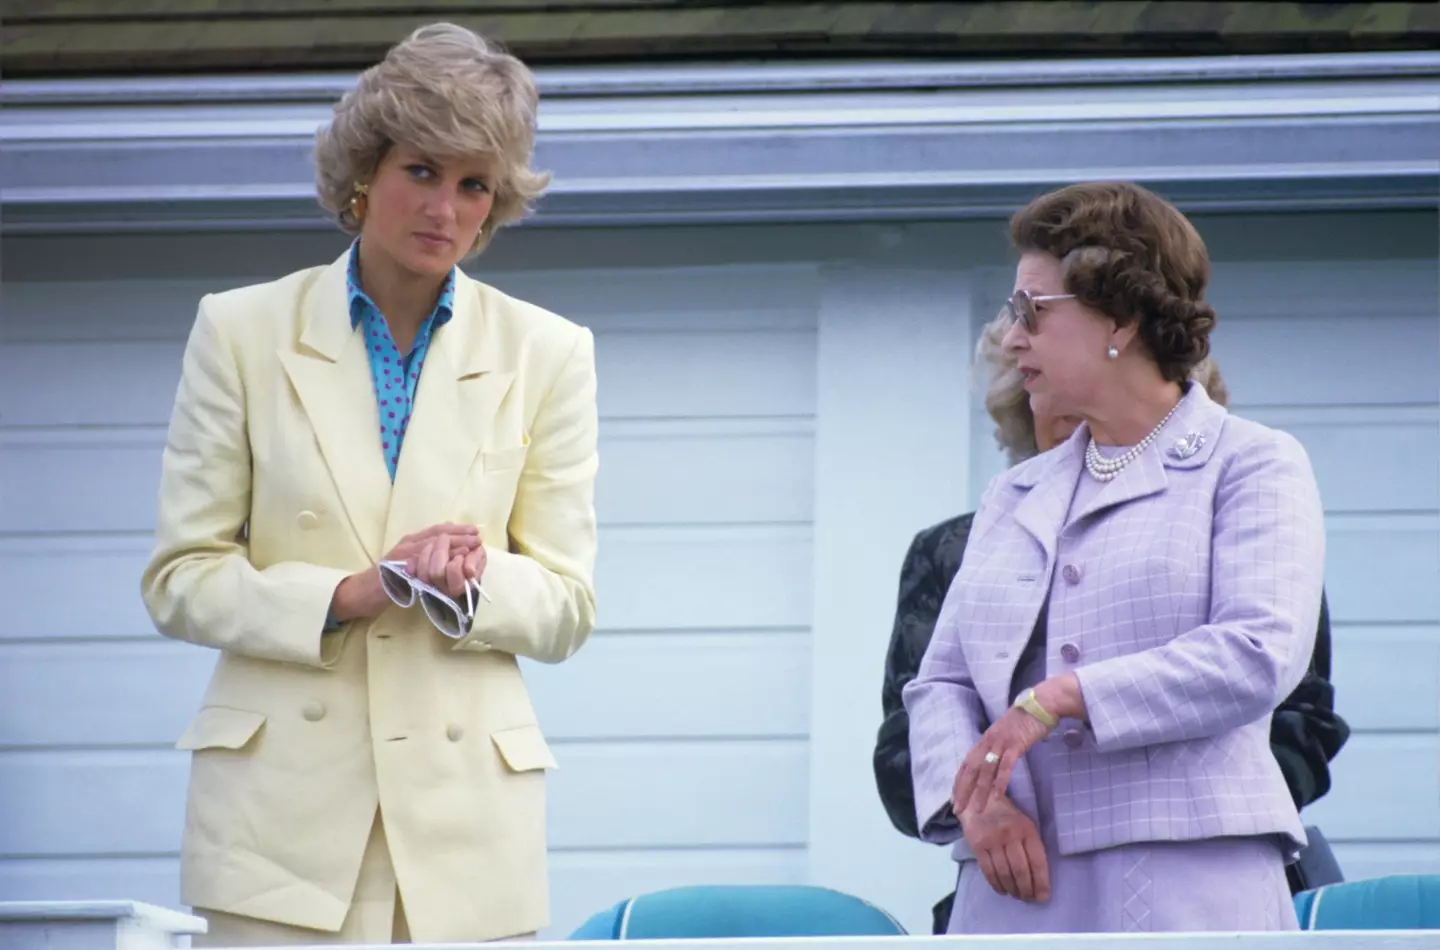 Conspiracy theories have surrounded Diana's death for years.